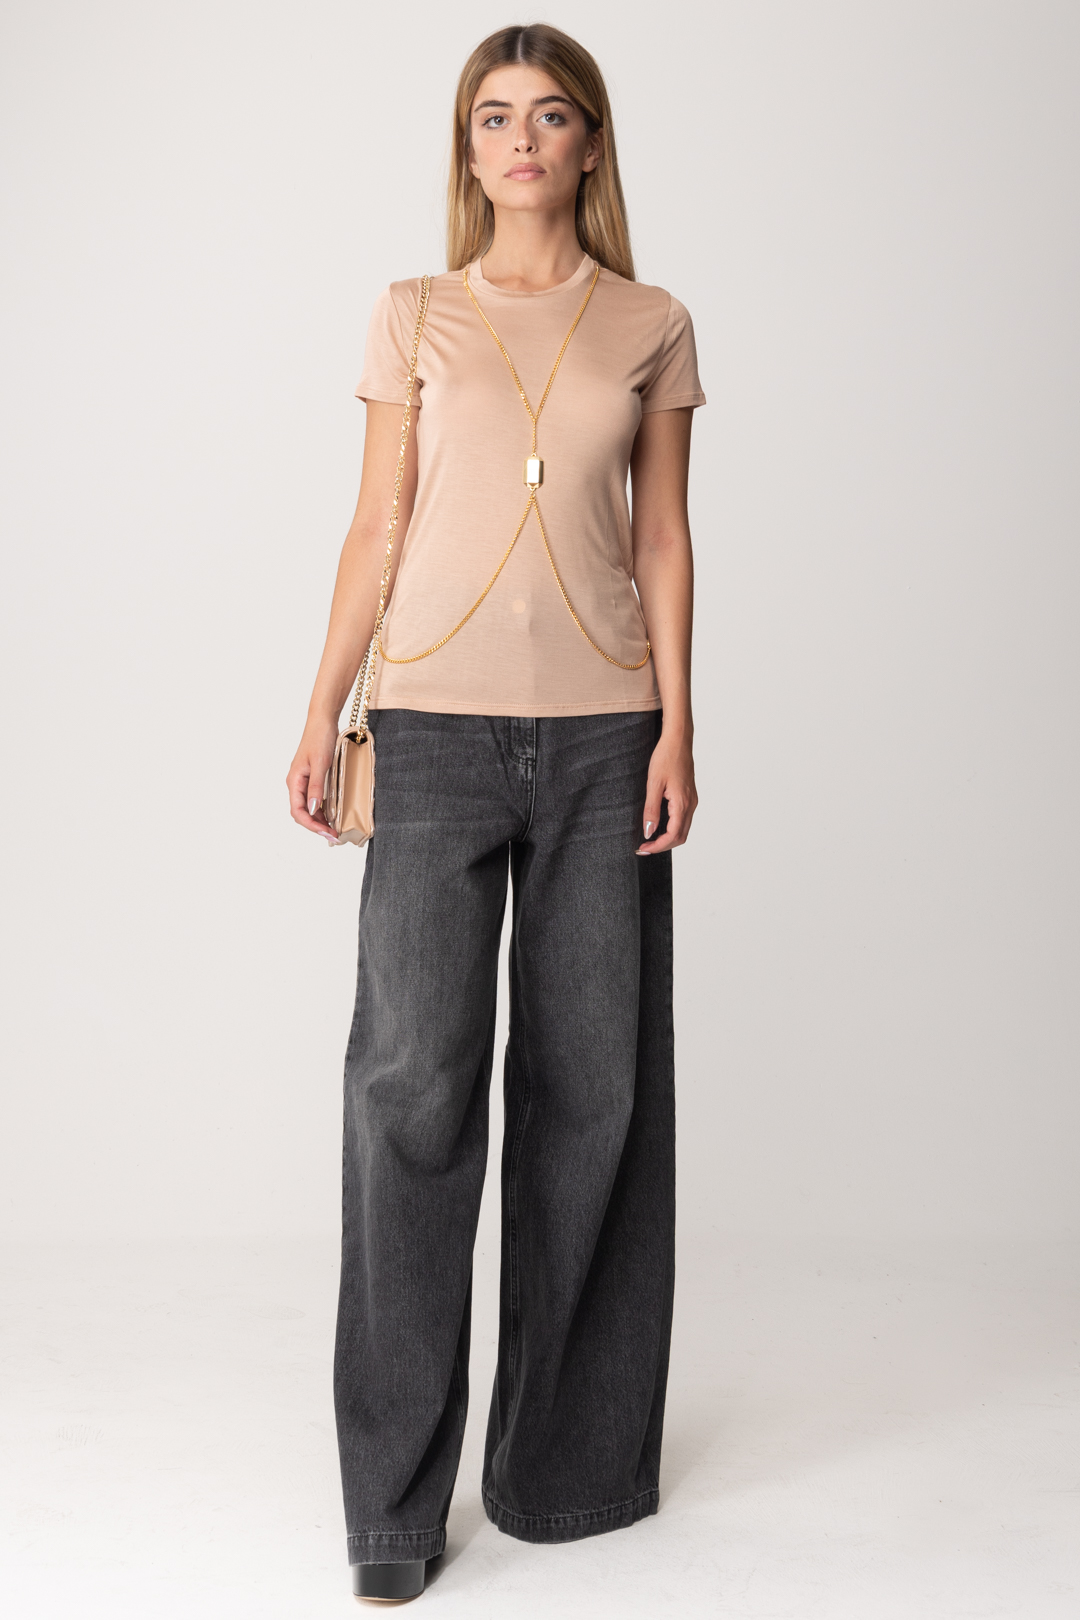 Preview: Elisabetta Franchi Jersey T-shirt with gold accessory Nudo